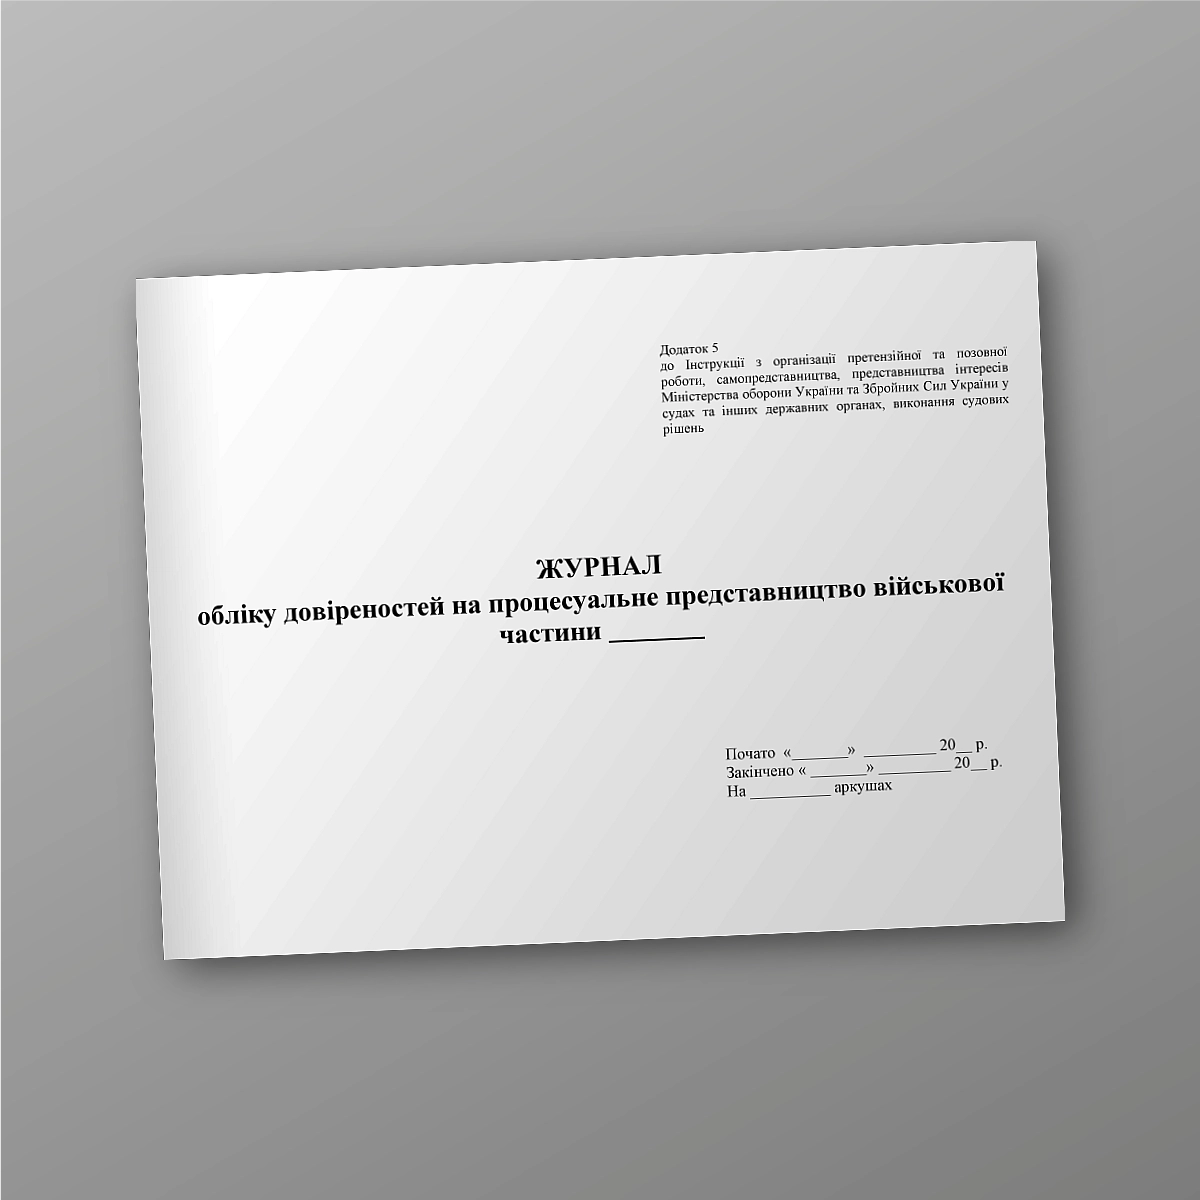 Logbook of powers of attorney for procedural representation of the military base | PrintTo: